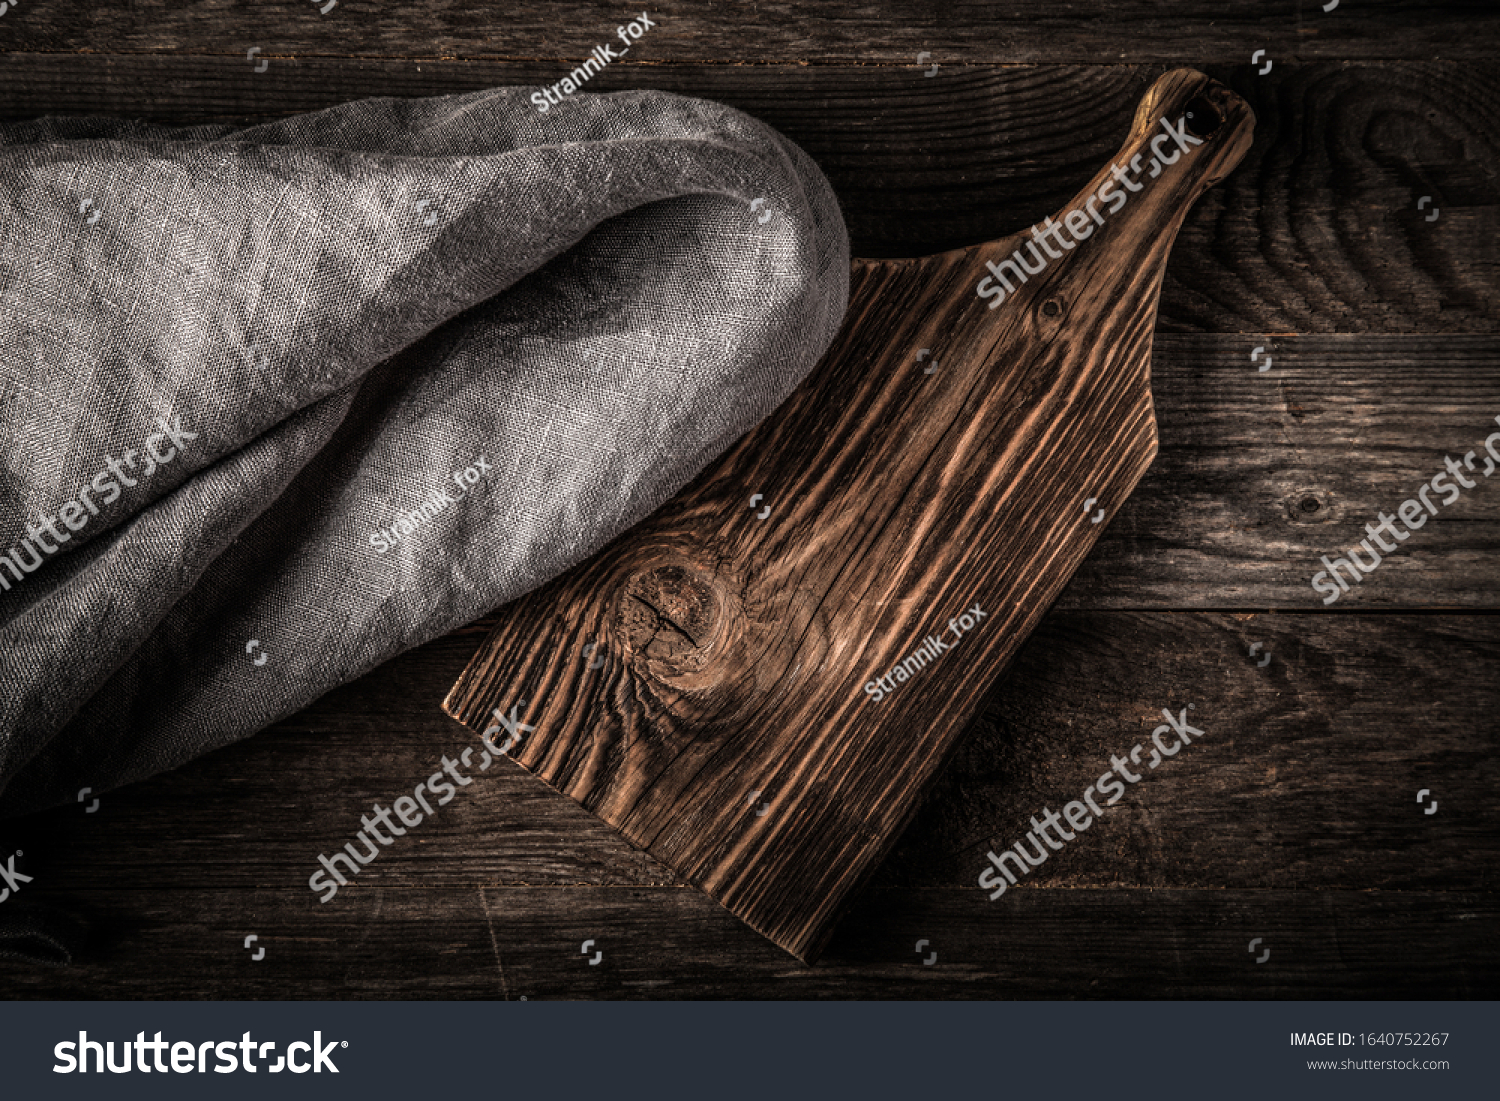 Rustic composition with a rough linen napkin. Toned. #1640752267